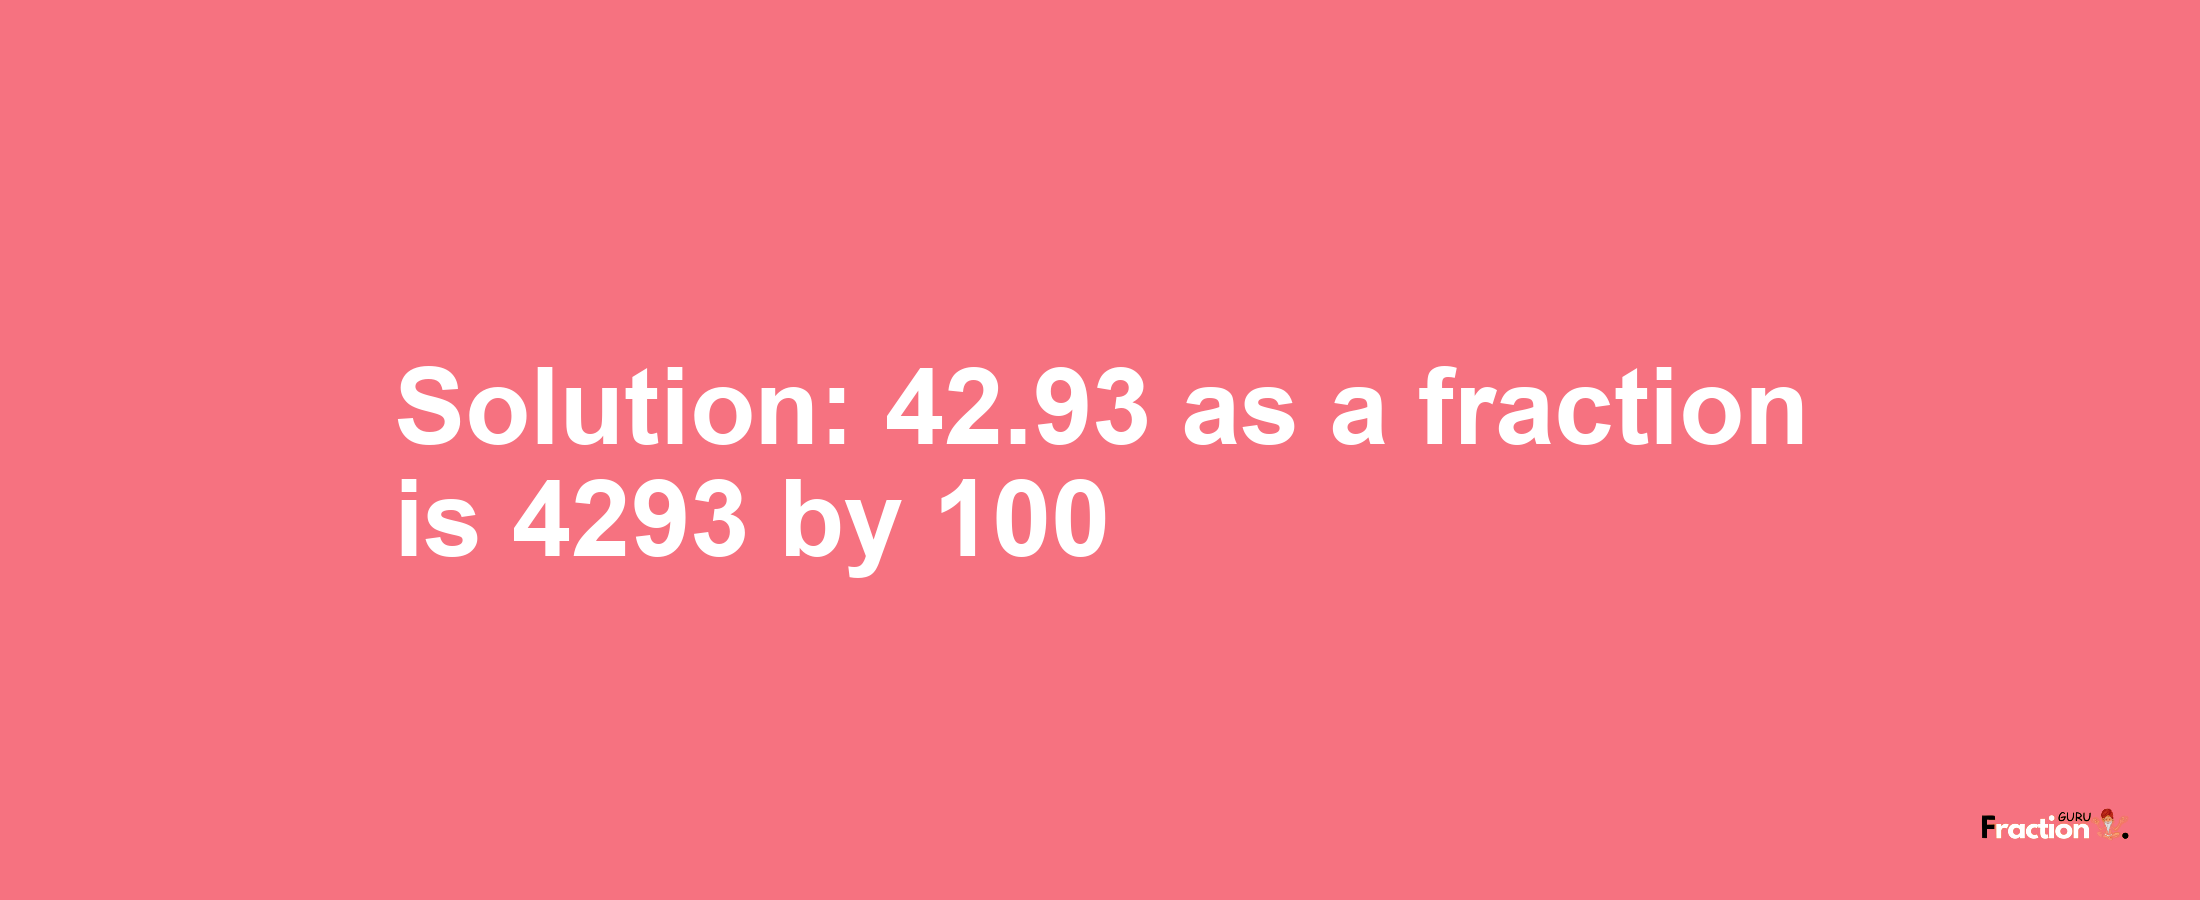 Solution:42.93 as a fraction is 4293/100